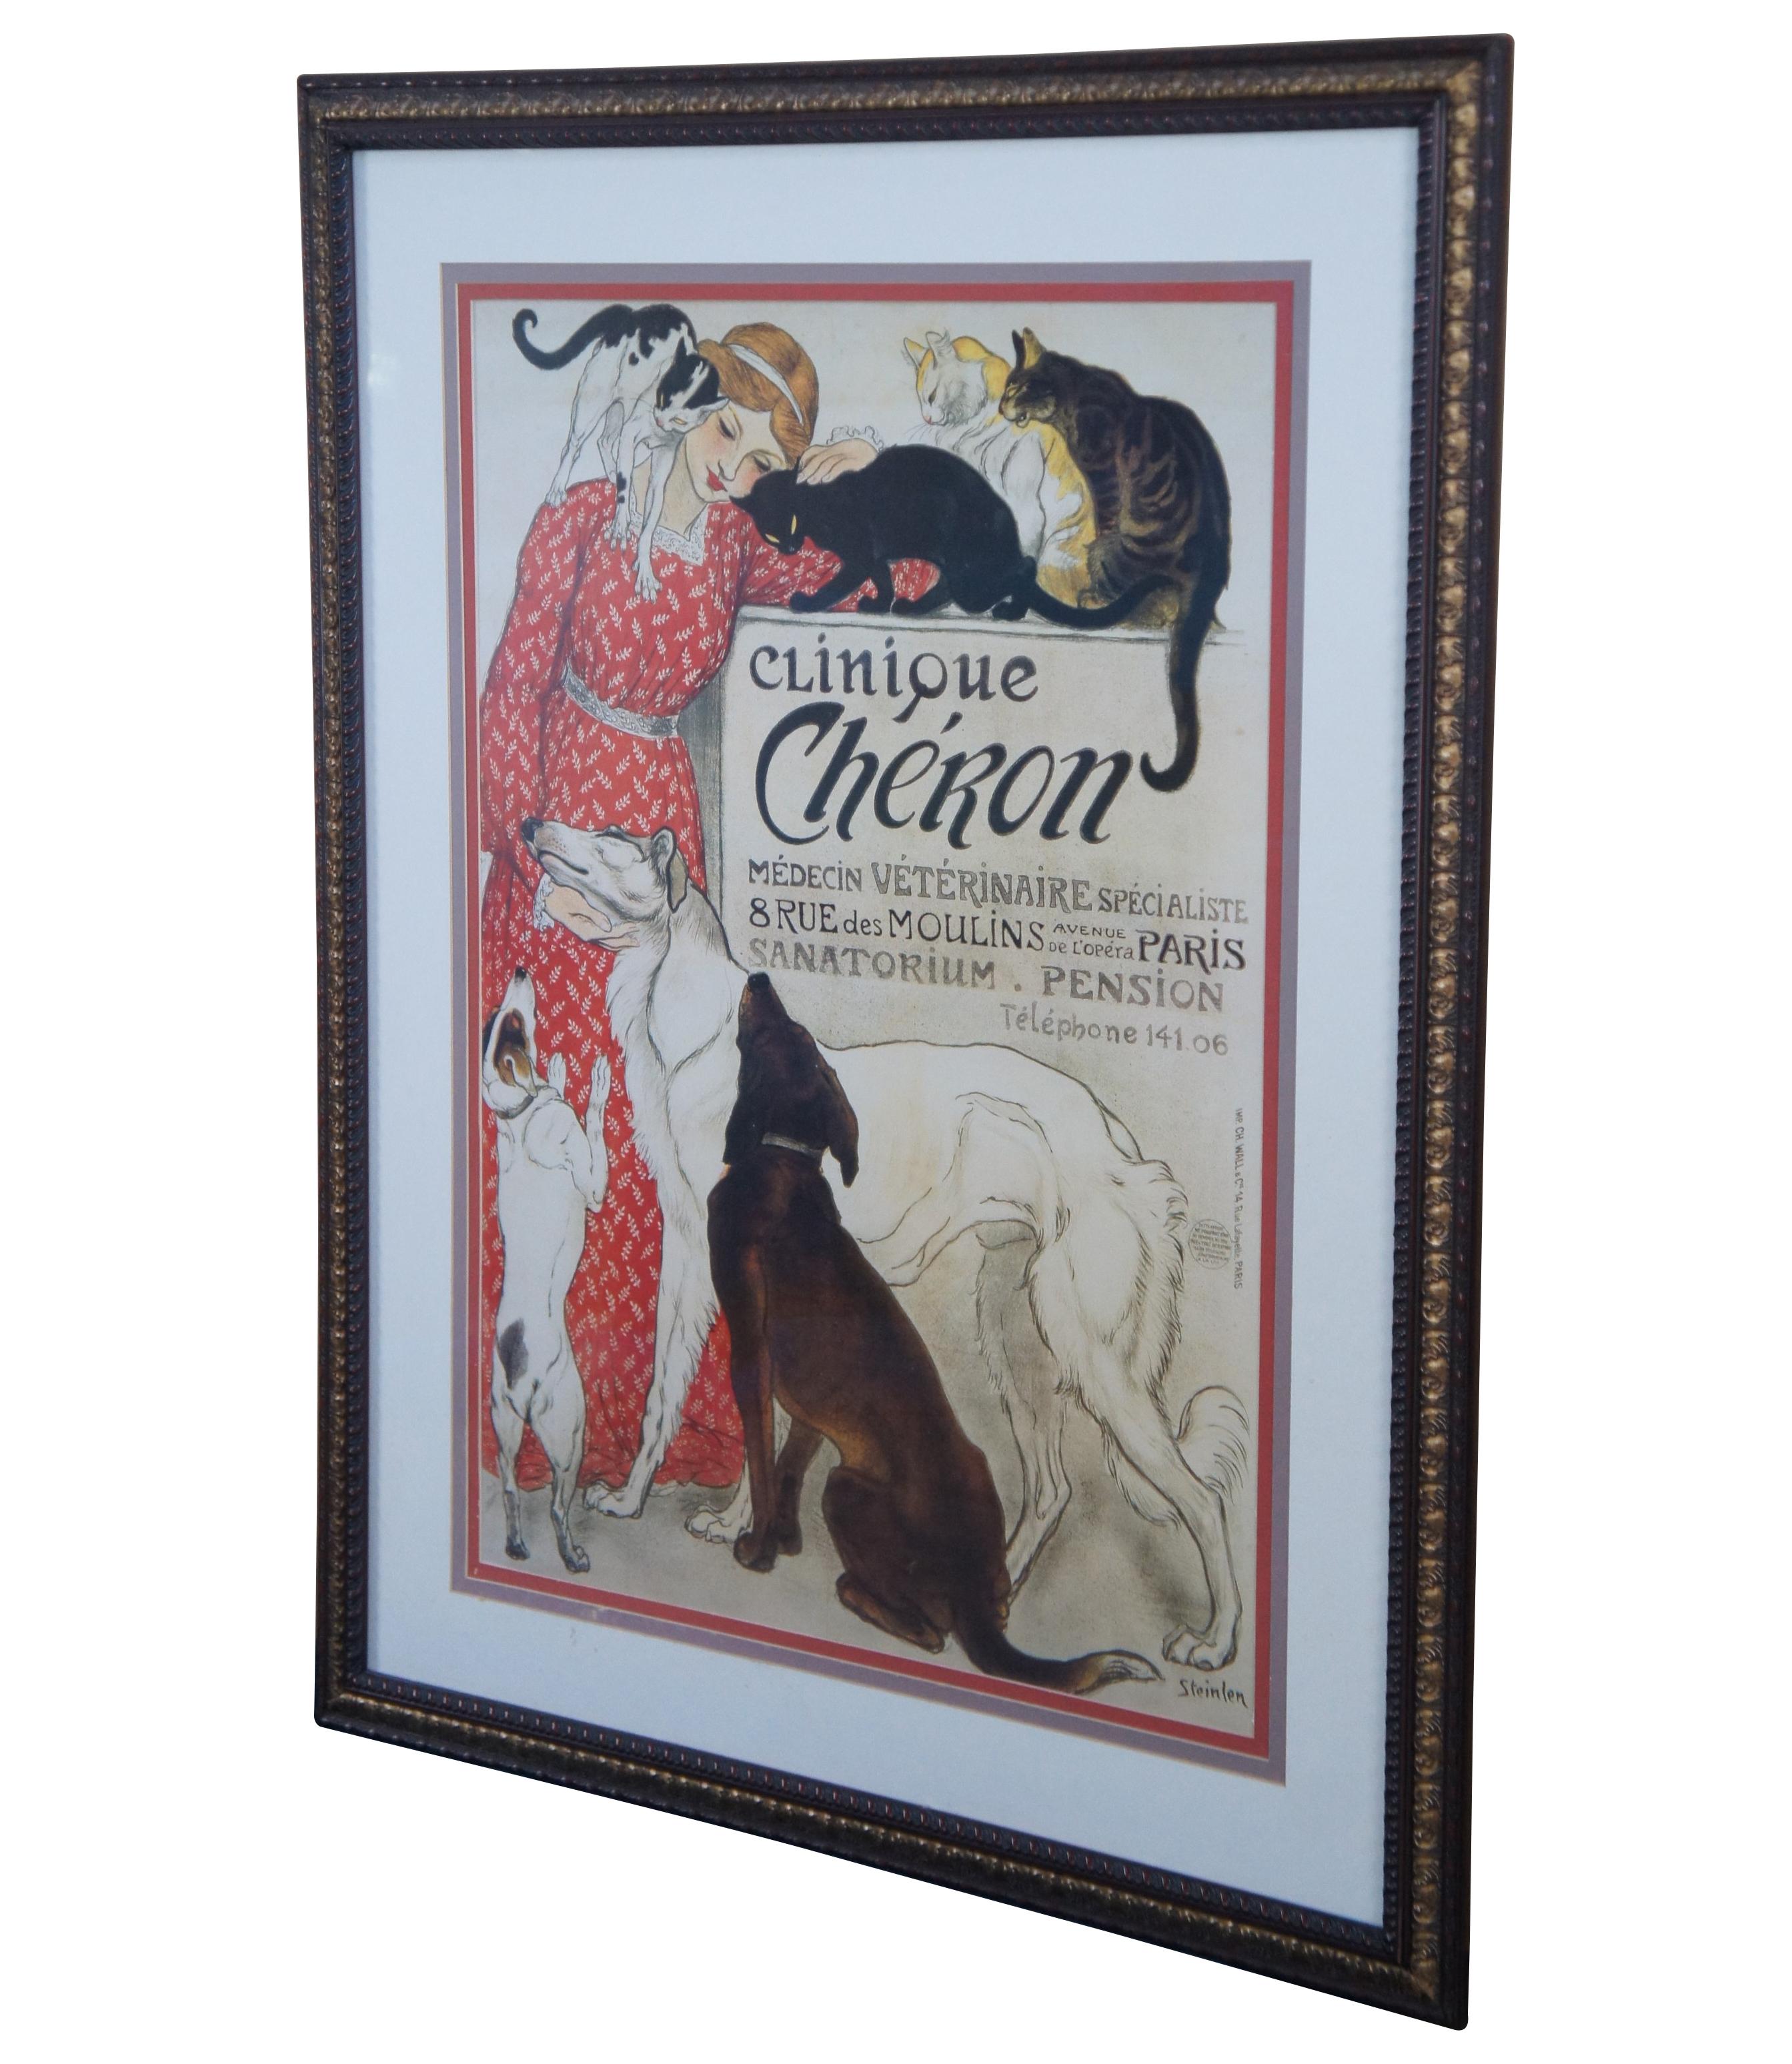 Vintage Bassett Fine Art framed print of Steinlens Clinique Cheron in Paris France. The advertisement for Veterinary Medicine features a woman in a red dress posing with cats and dogs. Bassett Fine Art, a Division of Bassett Mirror Co, Item